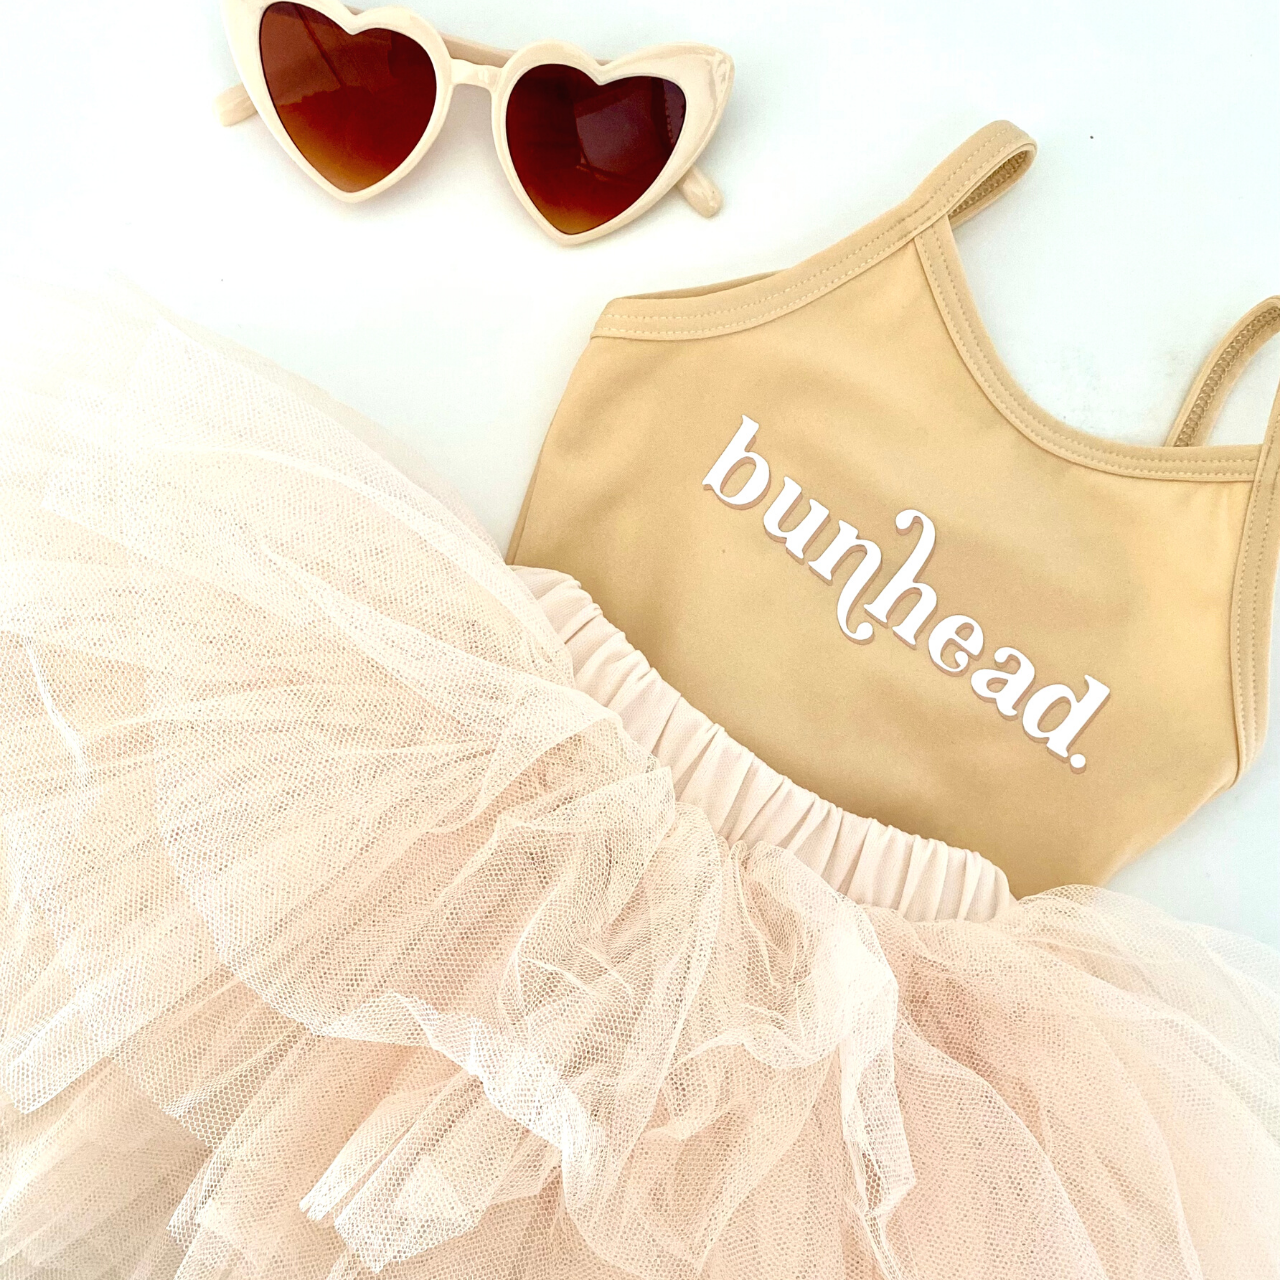 Bunhead Leotard for Baby Toddler ages 4-7 girl Ivory Dance Collection Sleeveless bodysuit Leotard Dance Outfit Trendy Stylish Comfortable Washable Stretchy Kids Glamour Girl Boutique Style Unique Clothing; Bunhead Leotard for Baby Toddler ages 4-7 Girl Gold Dance Collection Sleeveless Ballet Bodysuit